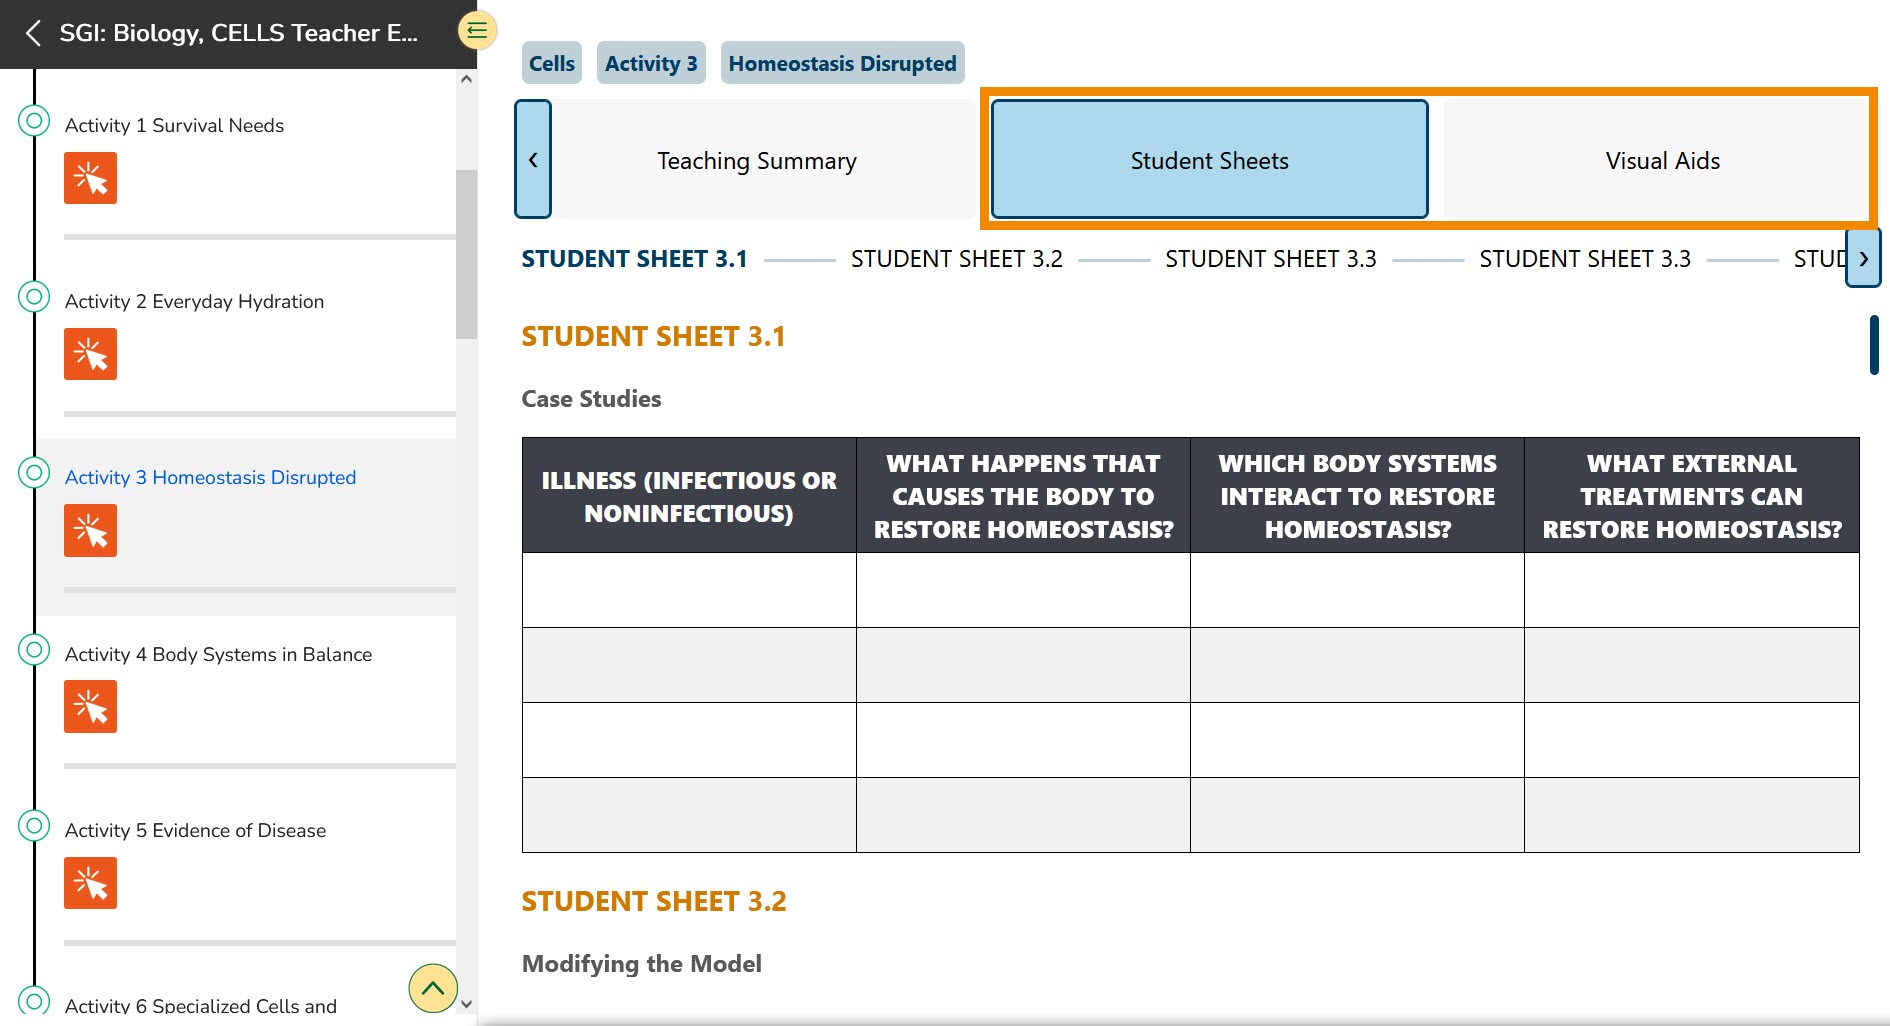 Student sheets and visual aids are available in HTML format at the end of each activity (the last headers of each activity). 